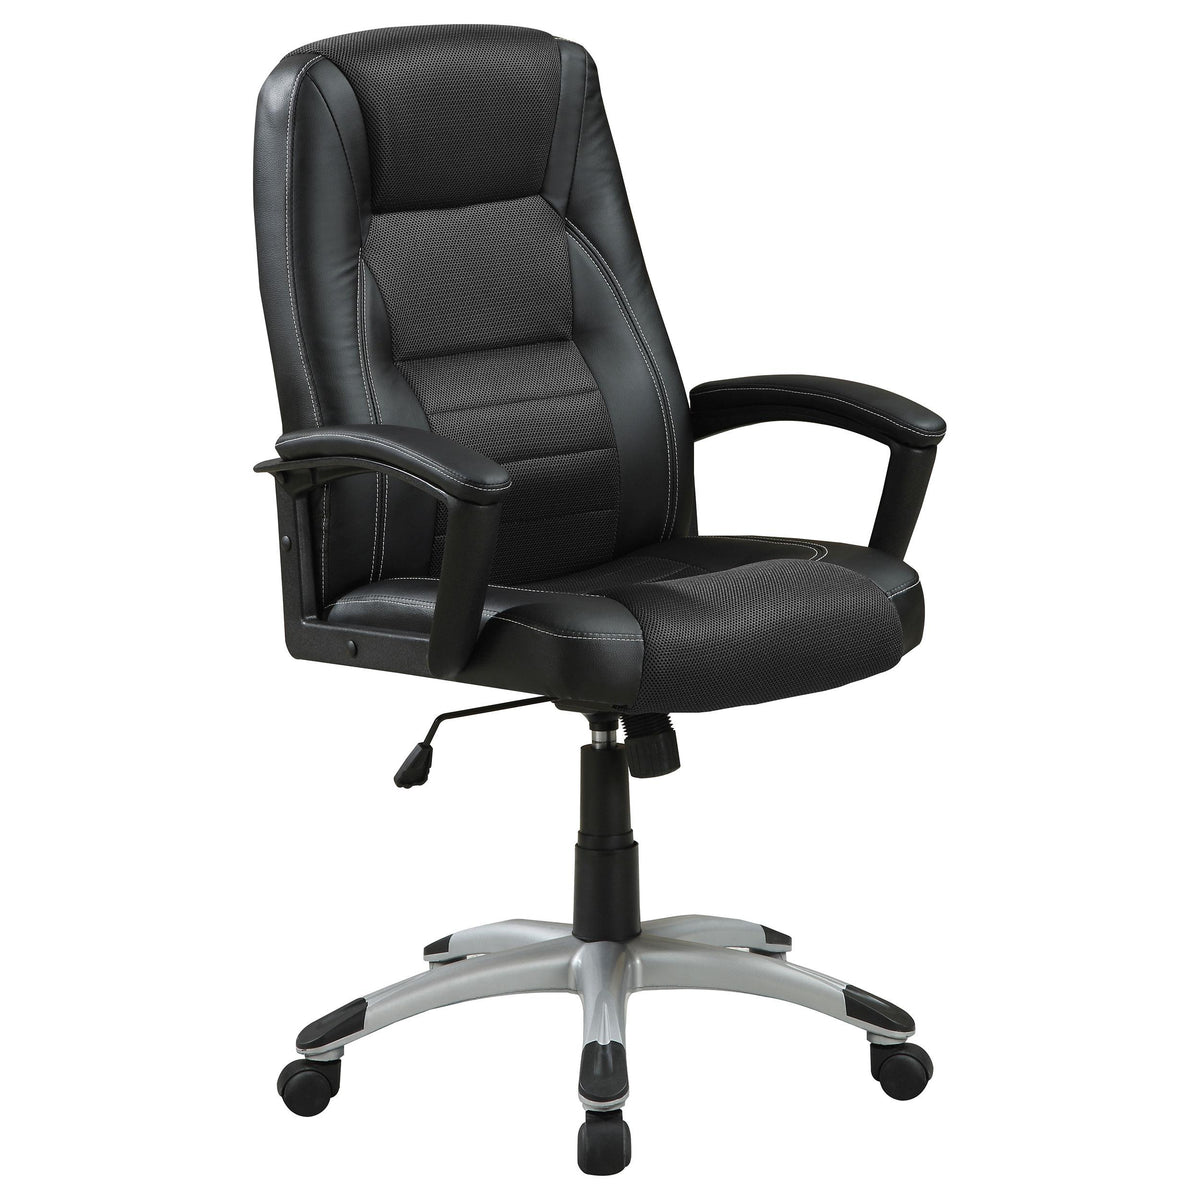 Dione Adjustable Height Office Chair Black Dione Adjustable Height Office Chair Black Half Price Furniture